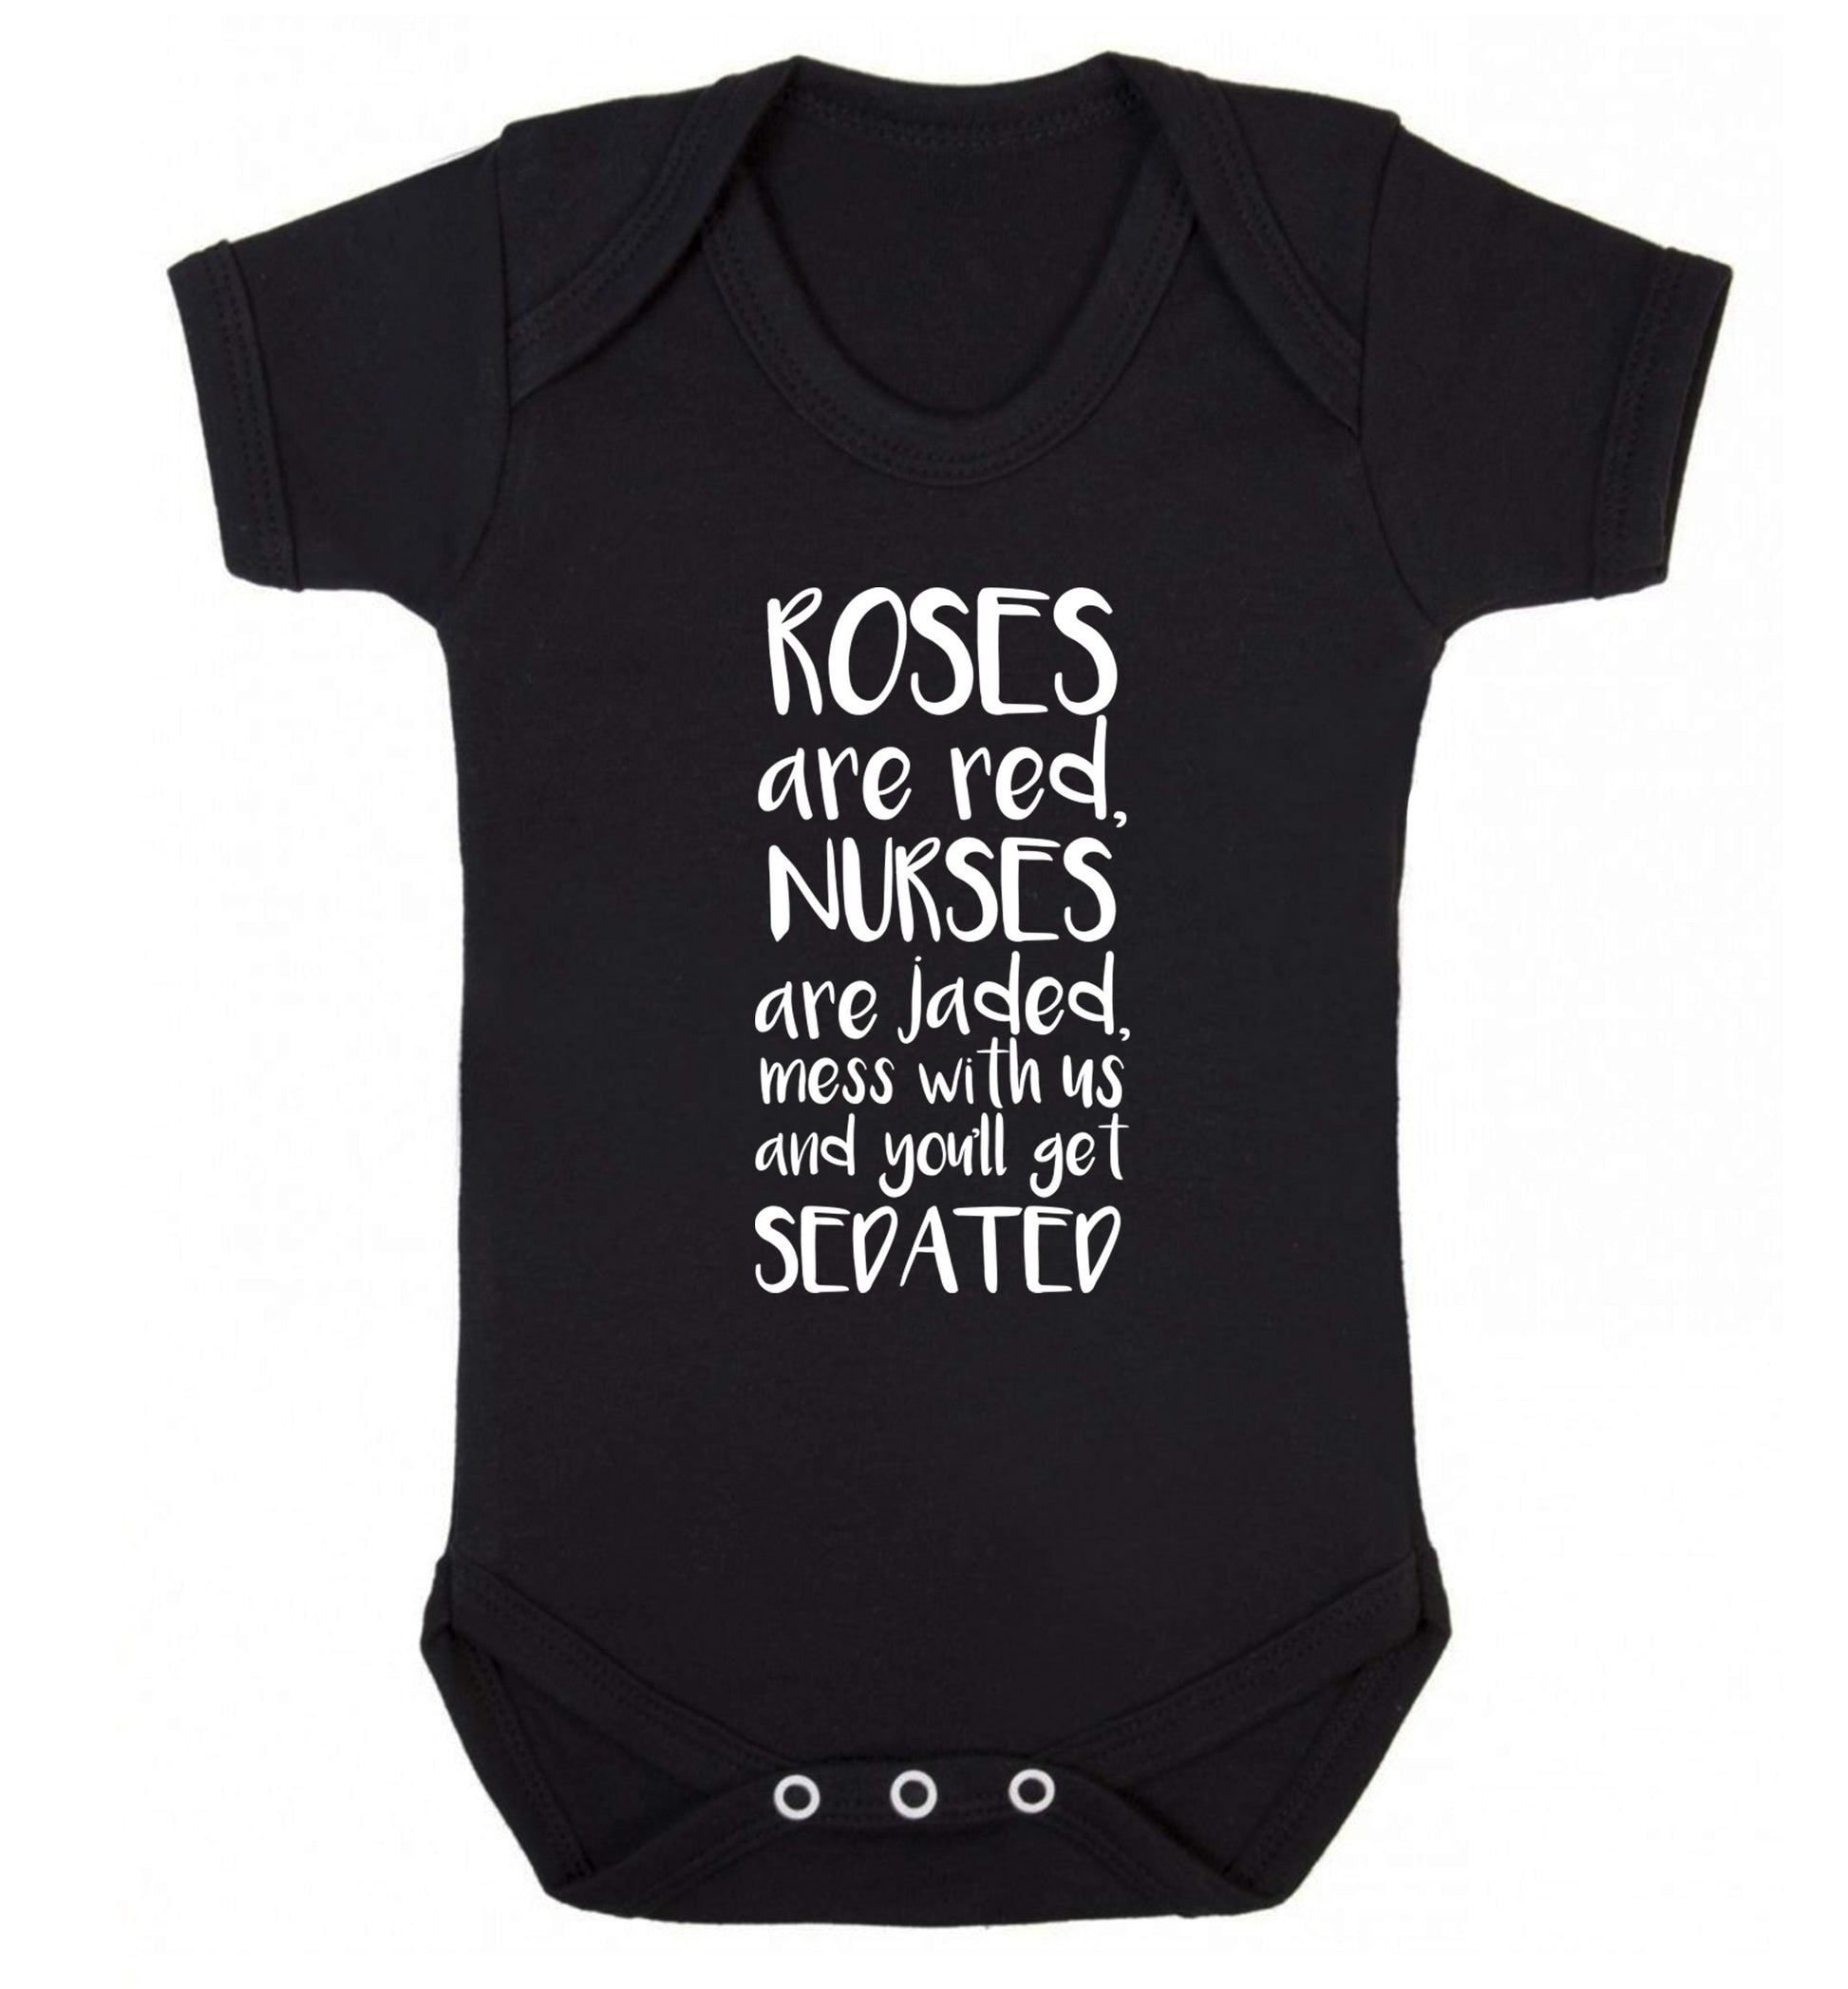 Roses are red, nurses are jaded, mess with us and you'll get sedated Baby Vest black 18-24 months